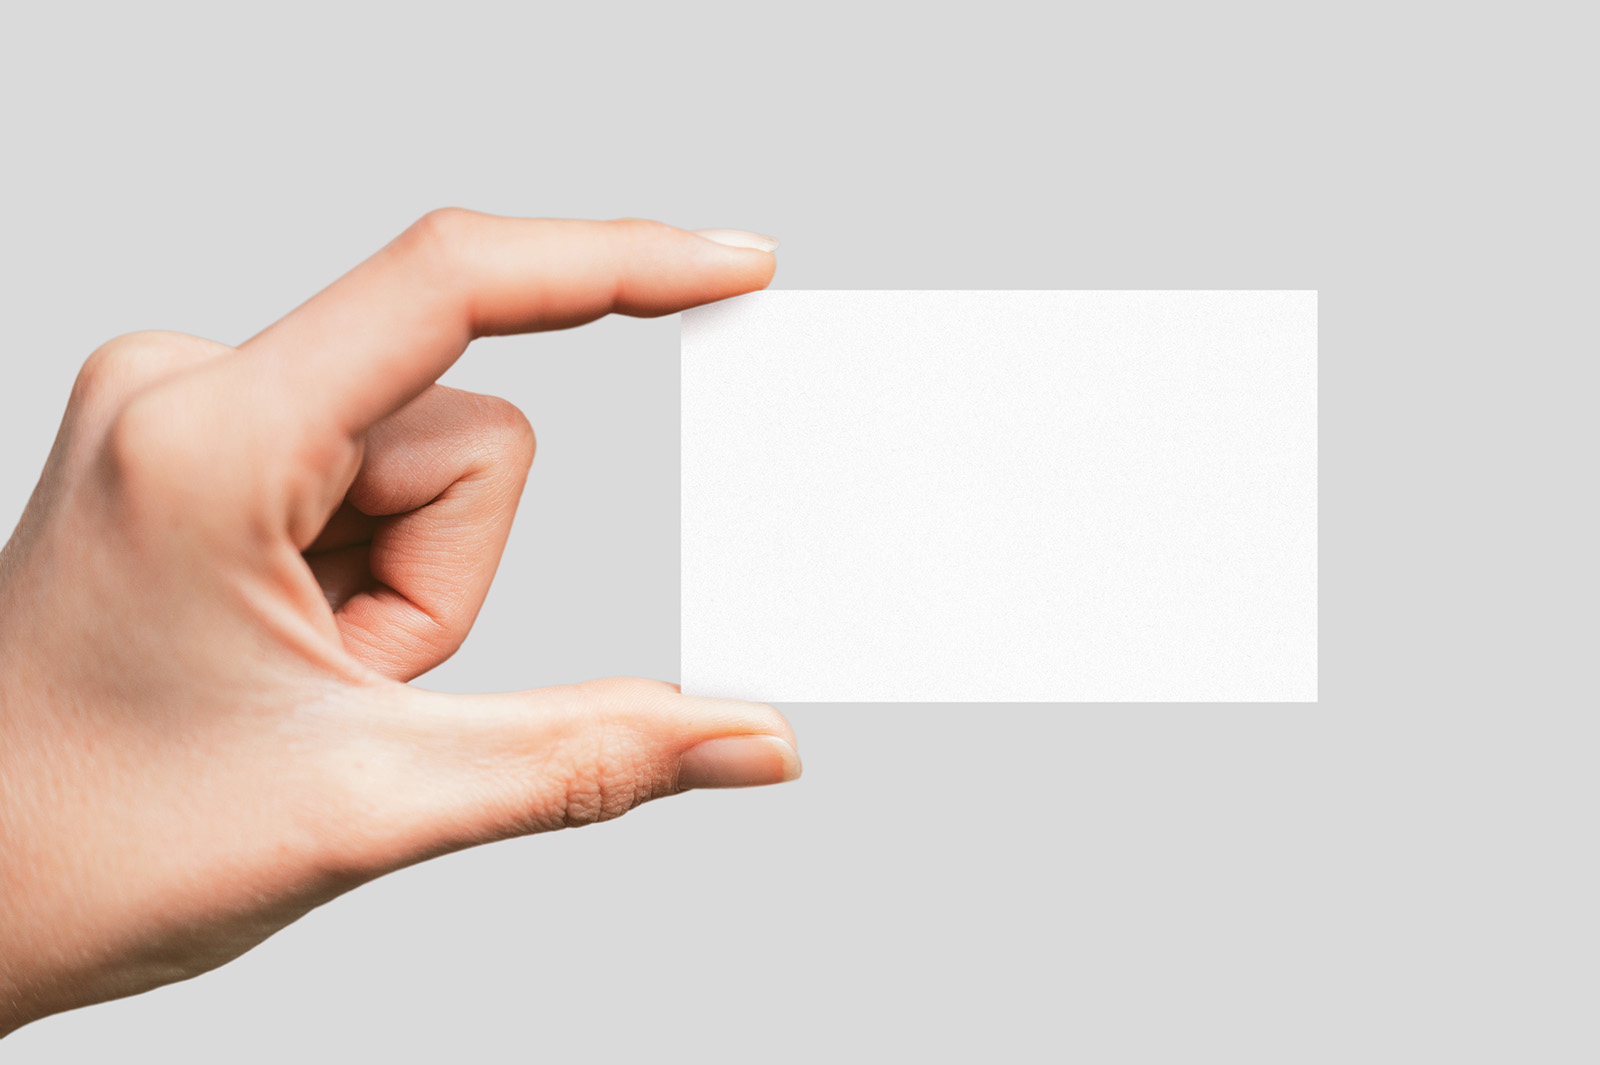 hand holding card png